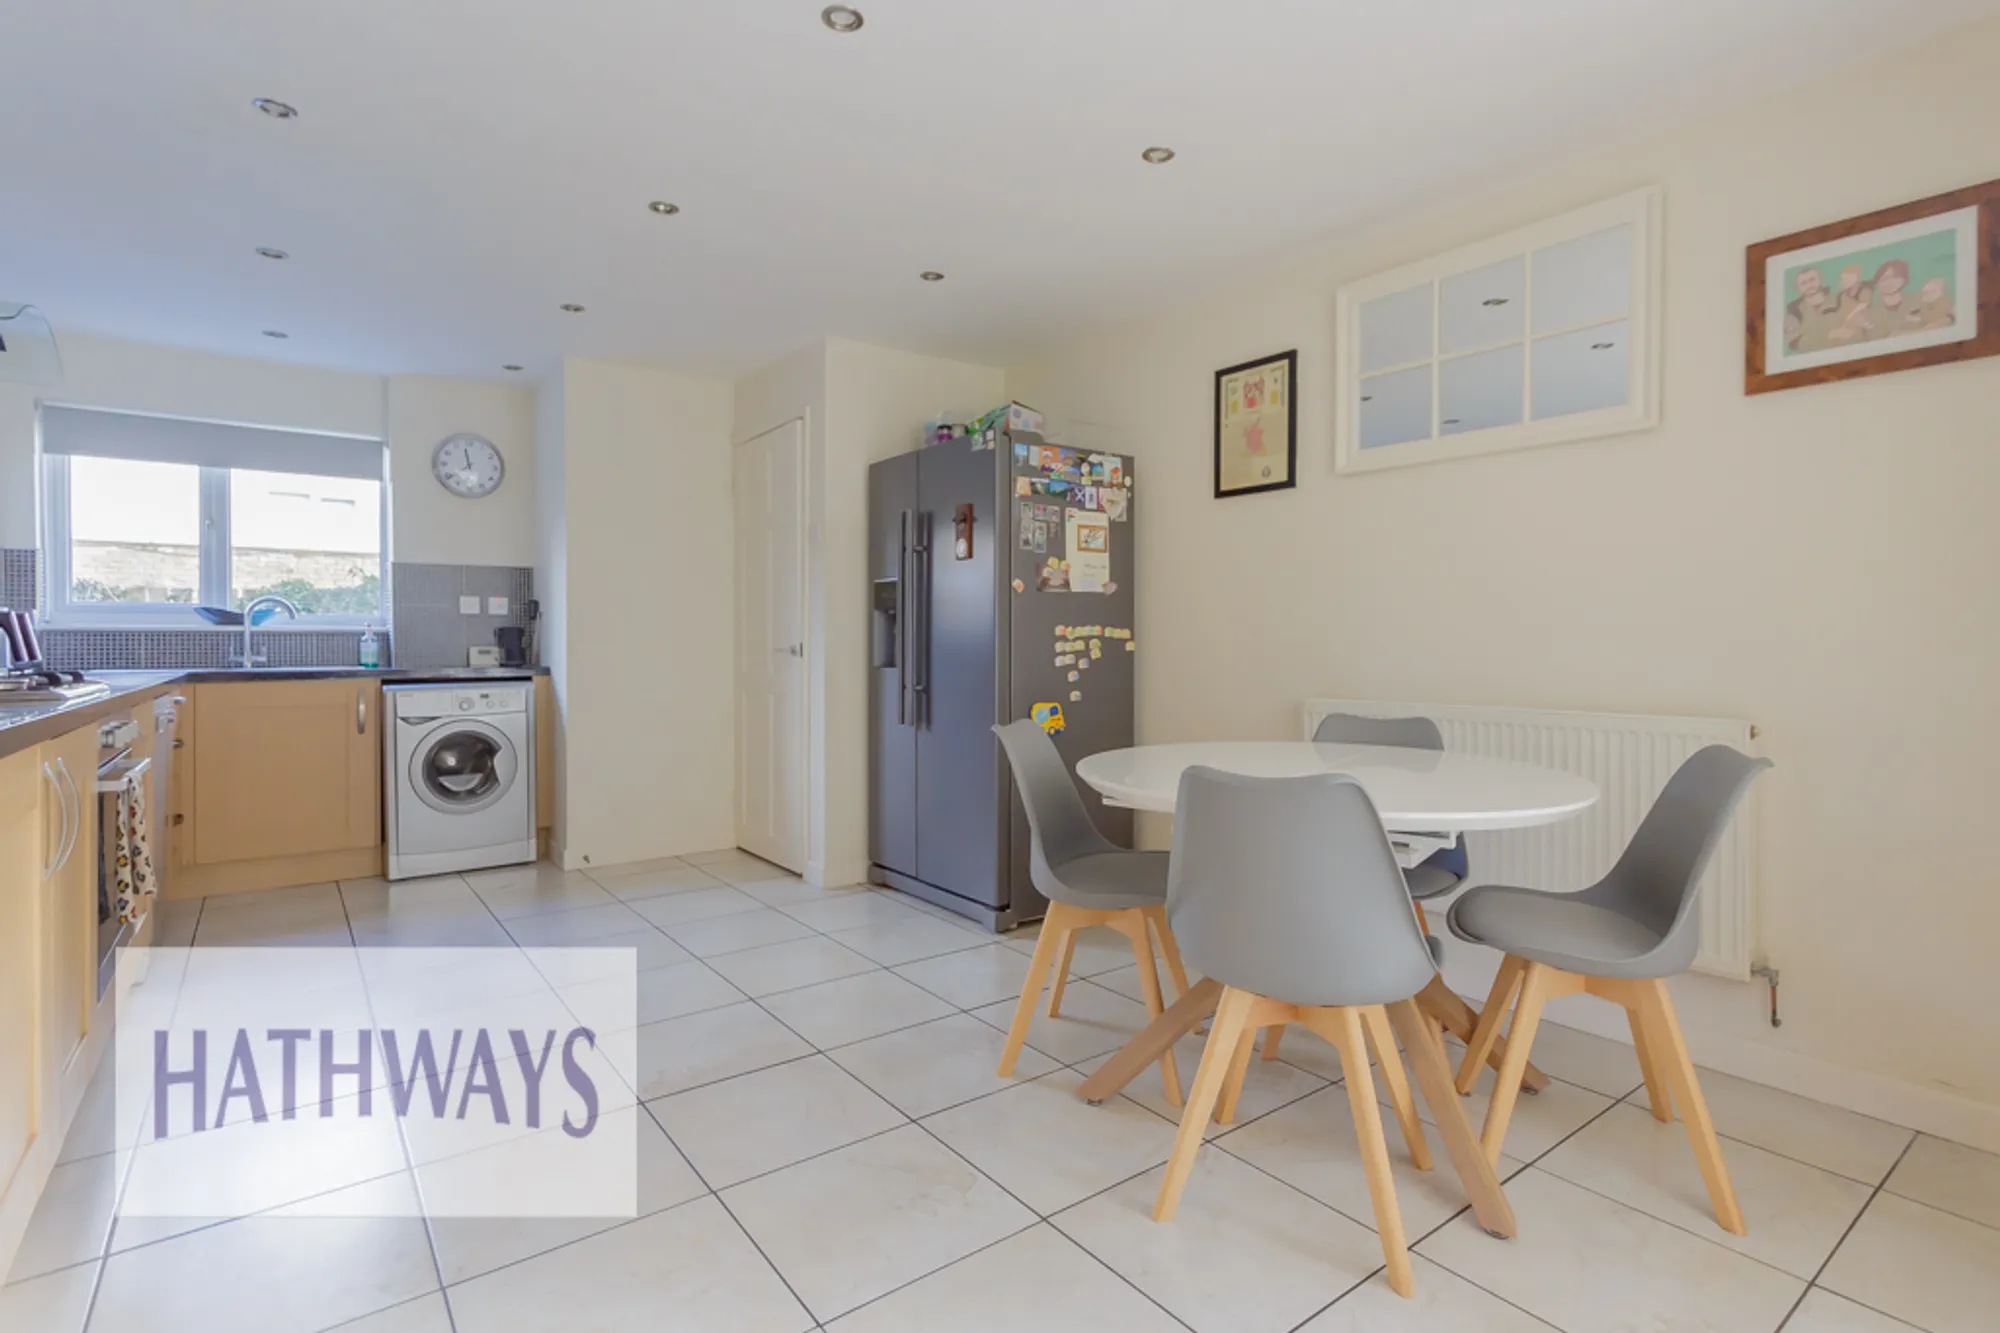 3 bed mid-terraced house for sale in East Roedin, Cwmbran  - Property Image 10